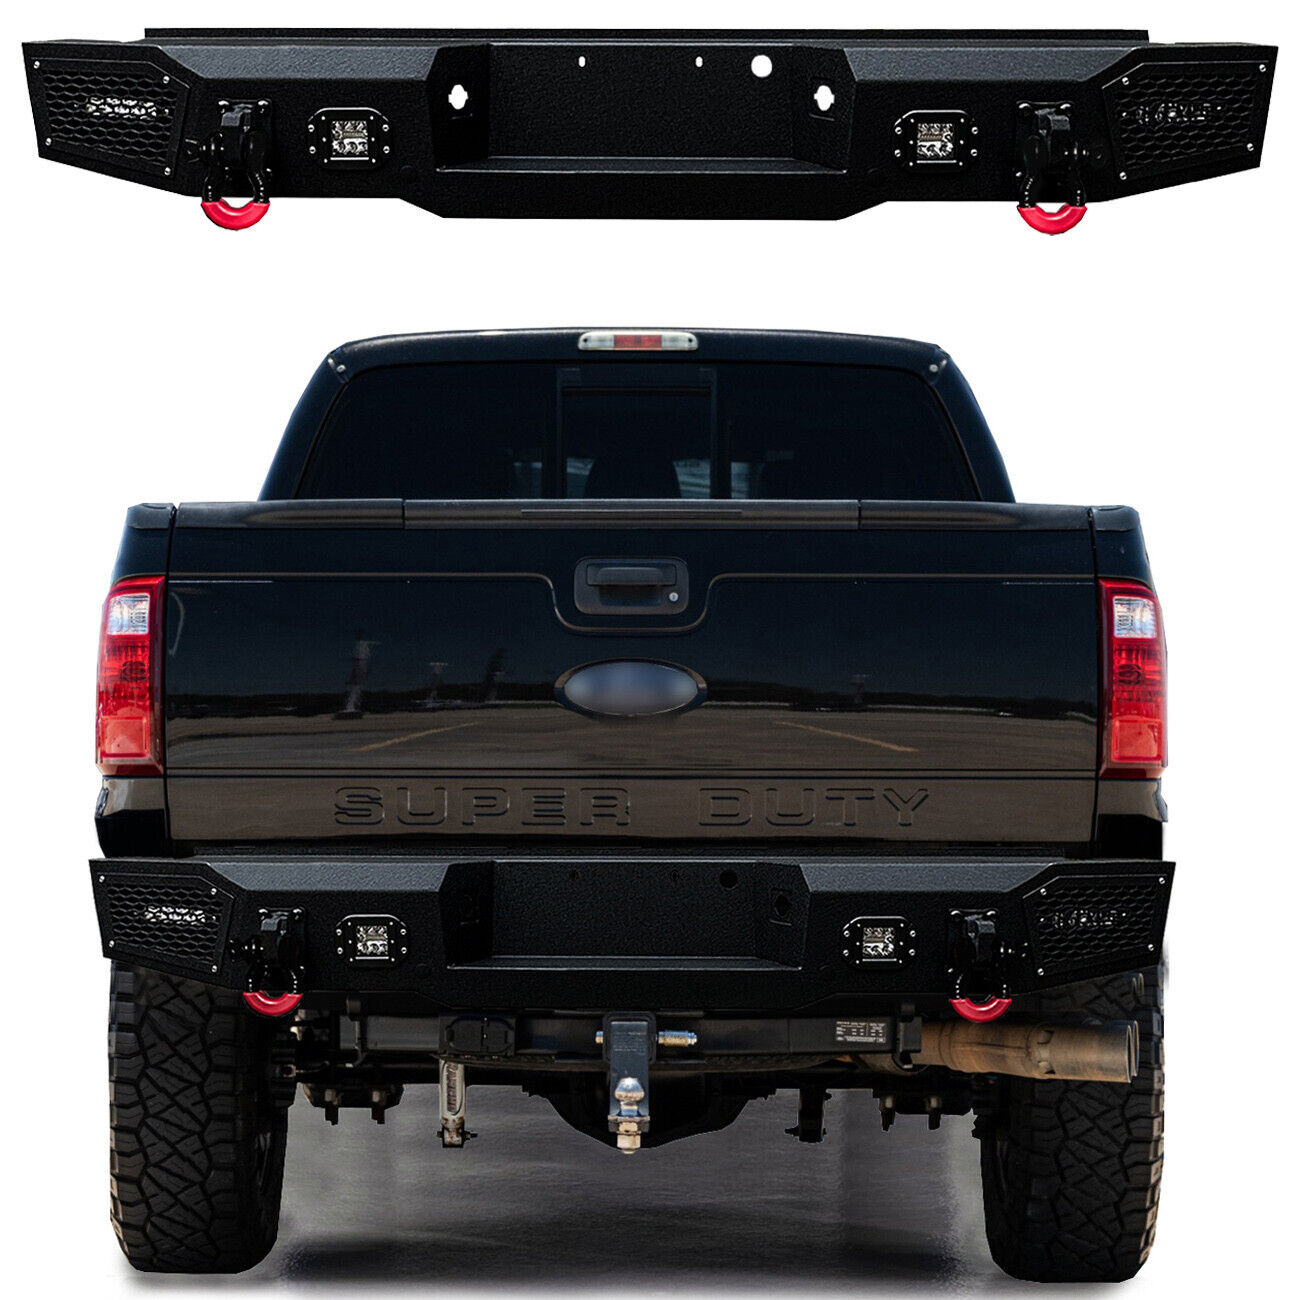 For 2011-2016 3rd Gen F250 F350 Textured Black Rear Bumper with 2x20W Light